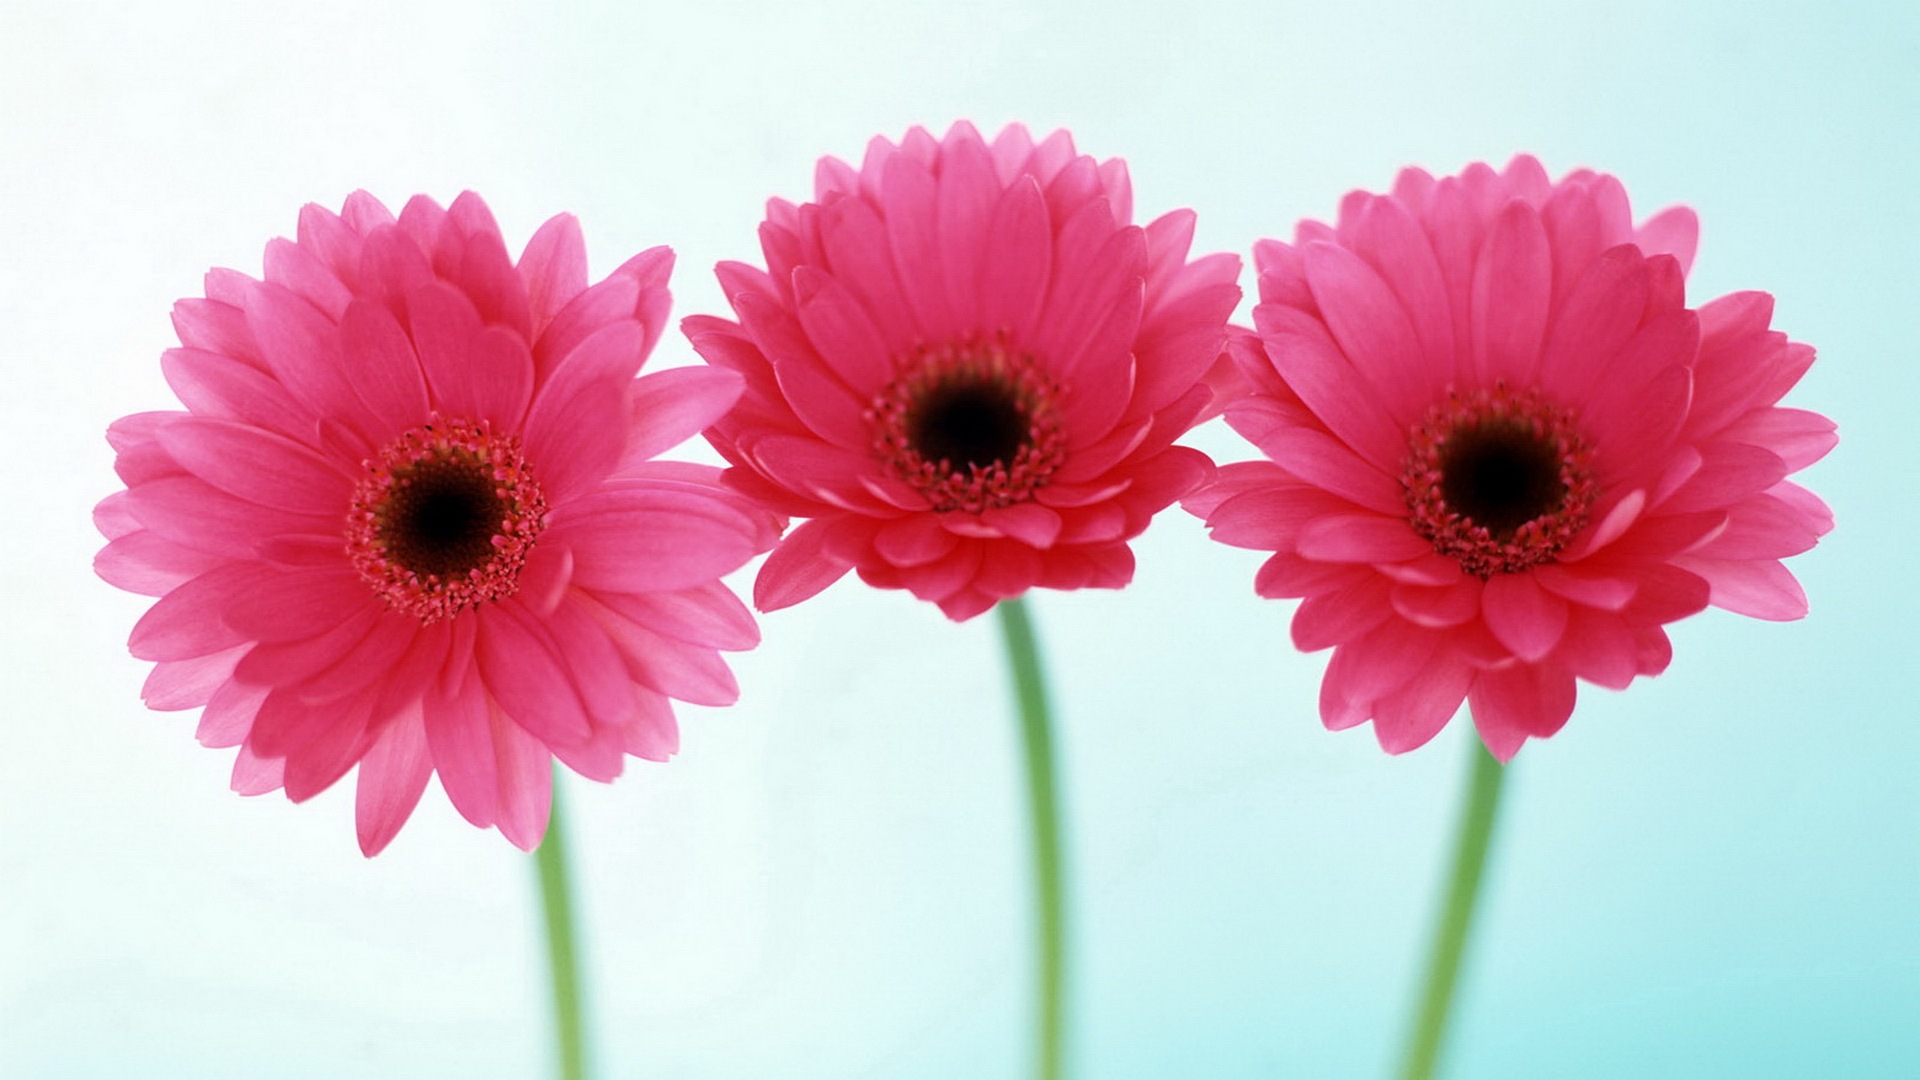 30 Pictures Of Flowers Free To Download